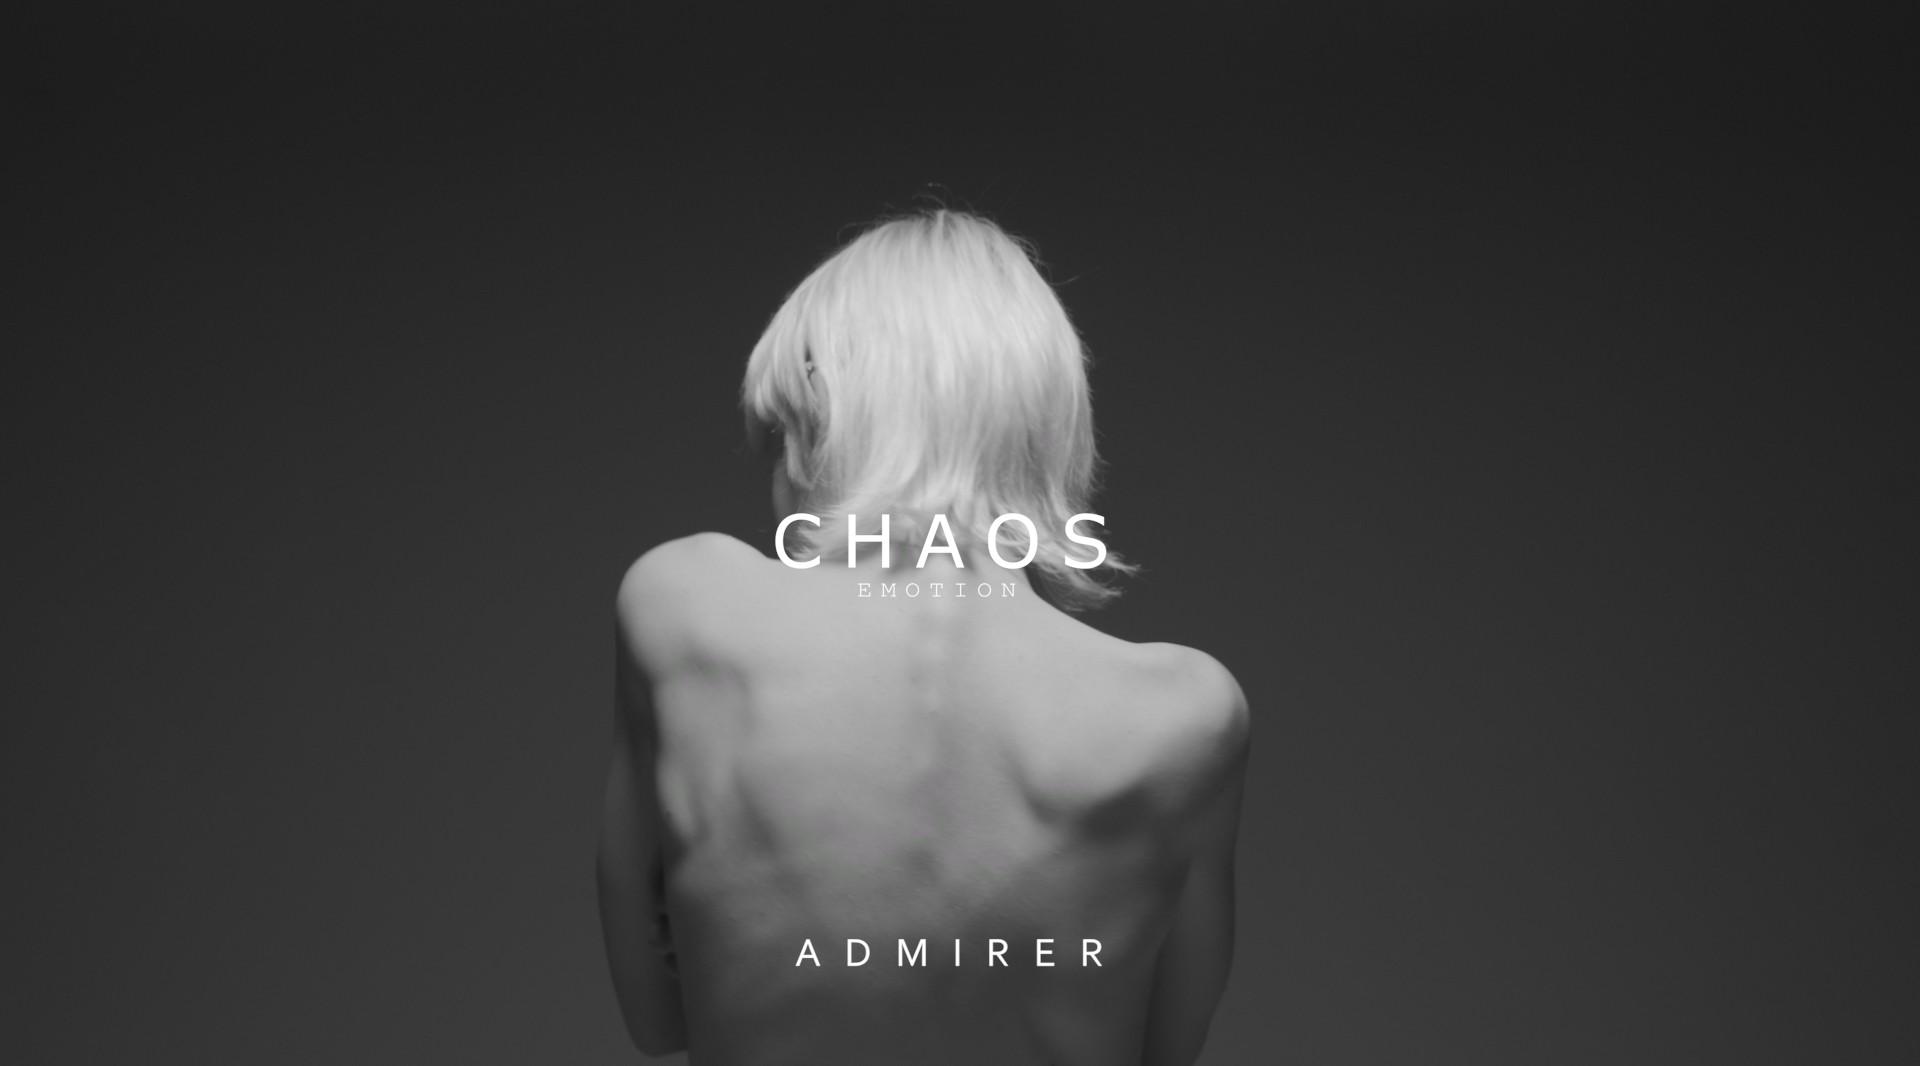 ADMIRER #CHAOS EMOTION #BY BAK